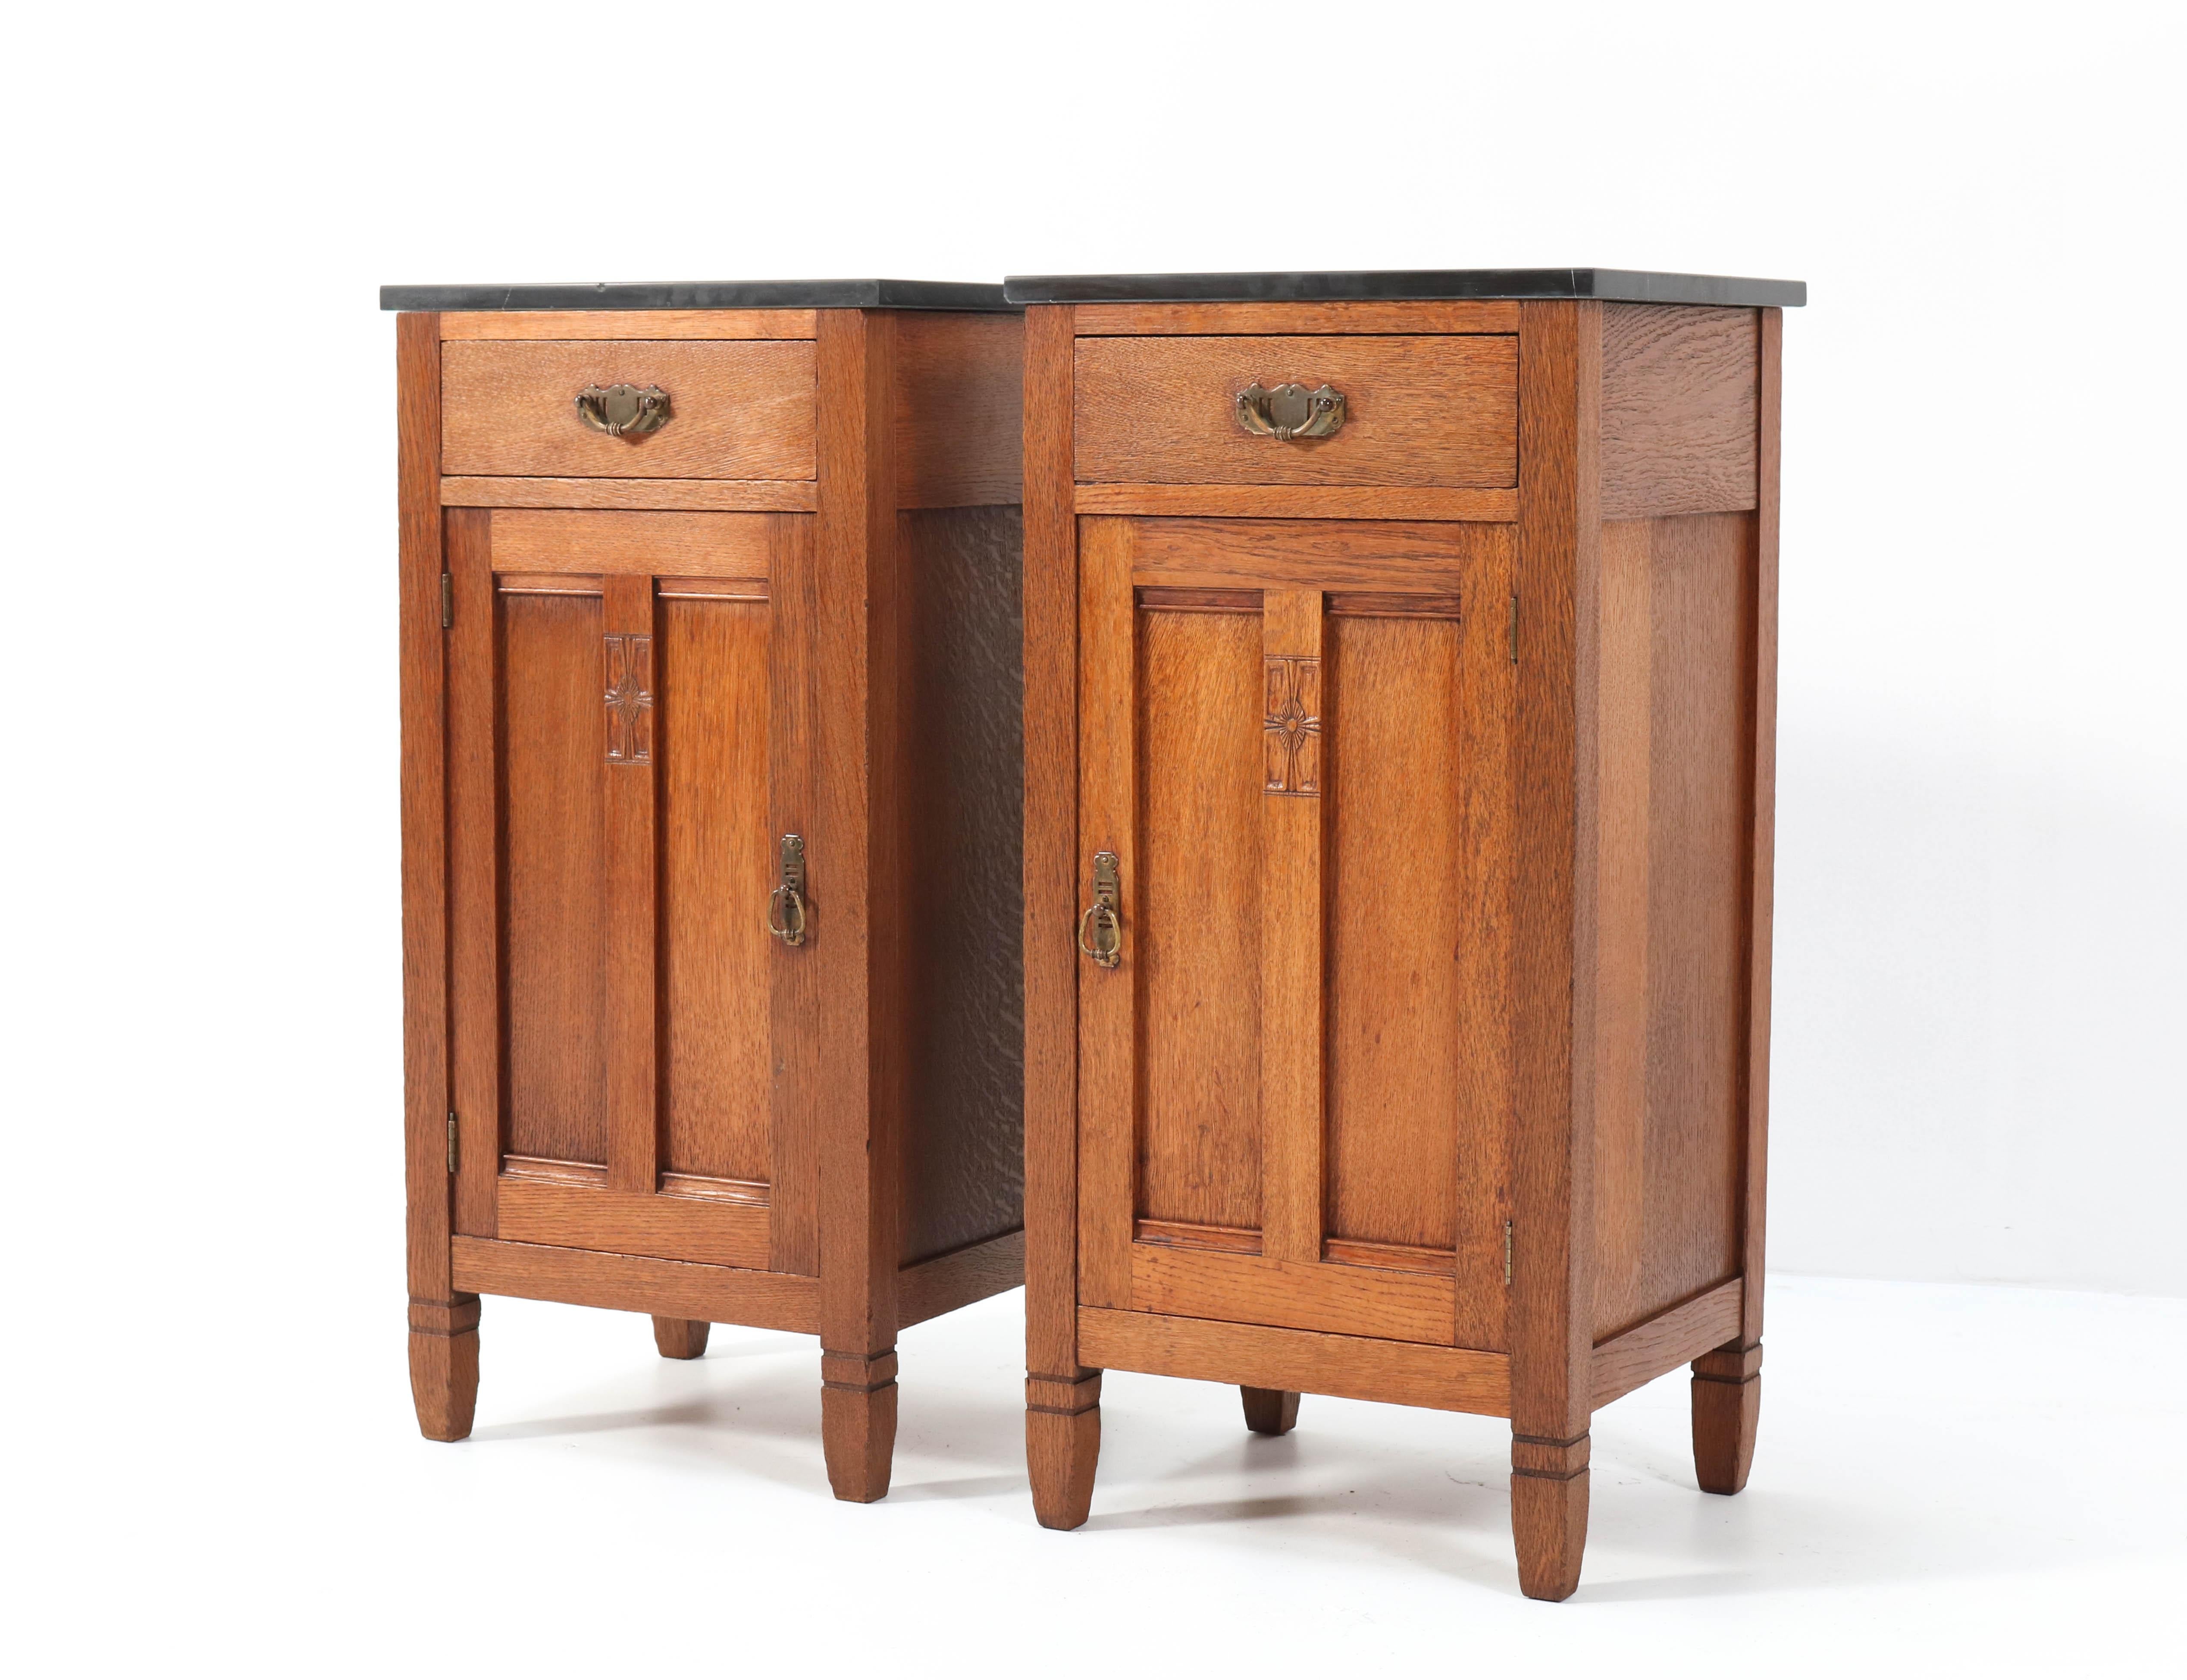 Magnificent and rare pair of Arts & Crafts Art Nouveau nightstands.
Design by H. Pander & Zonen.
Striking Dutch design from the 1900s.
Solid oak with black marble tops.
Original brass handles on doors and drawers.
Marked with original